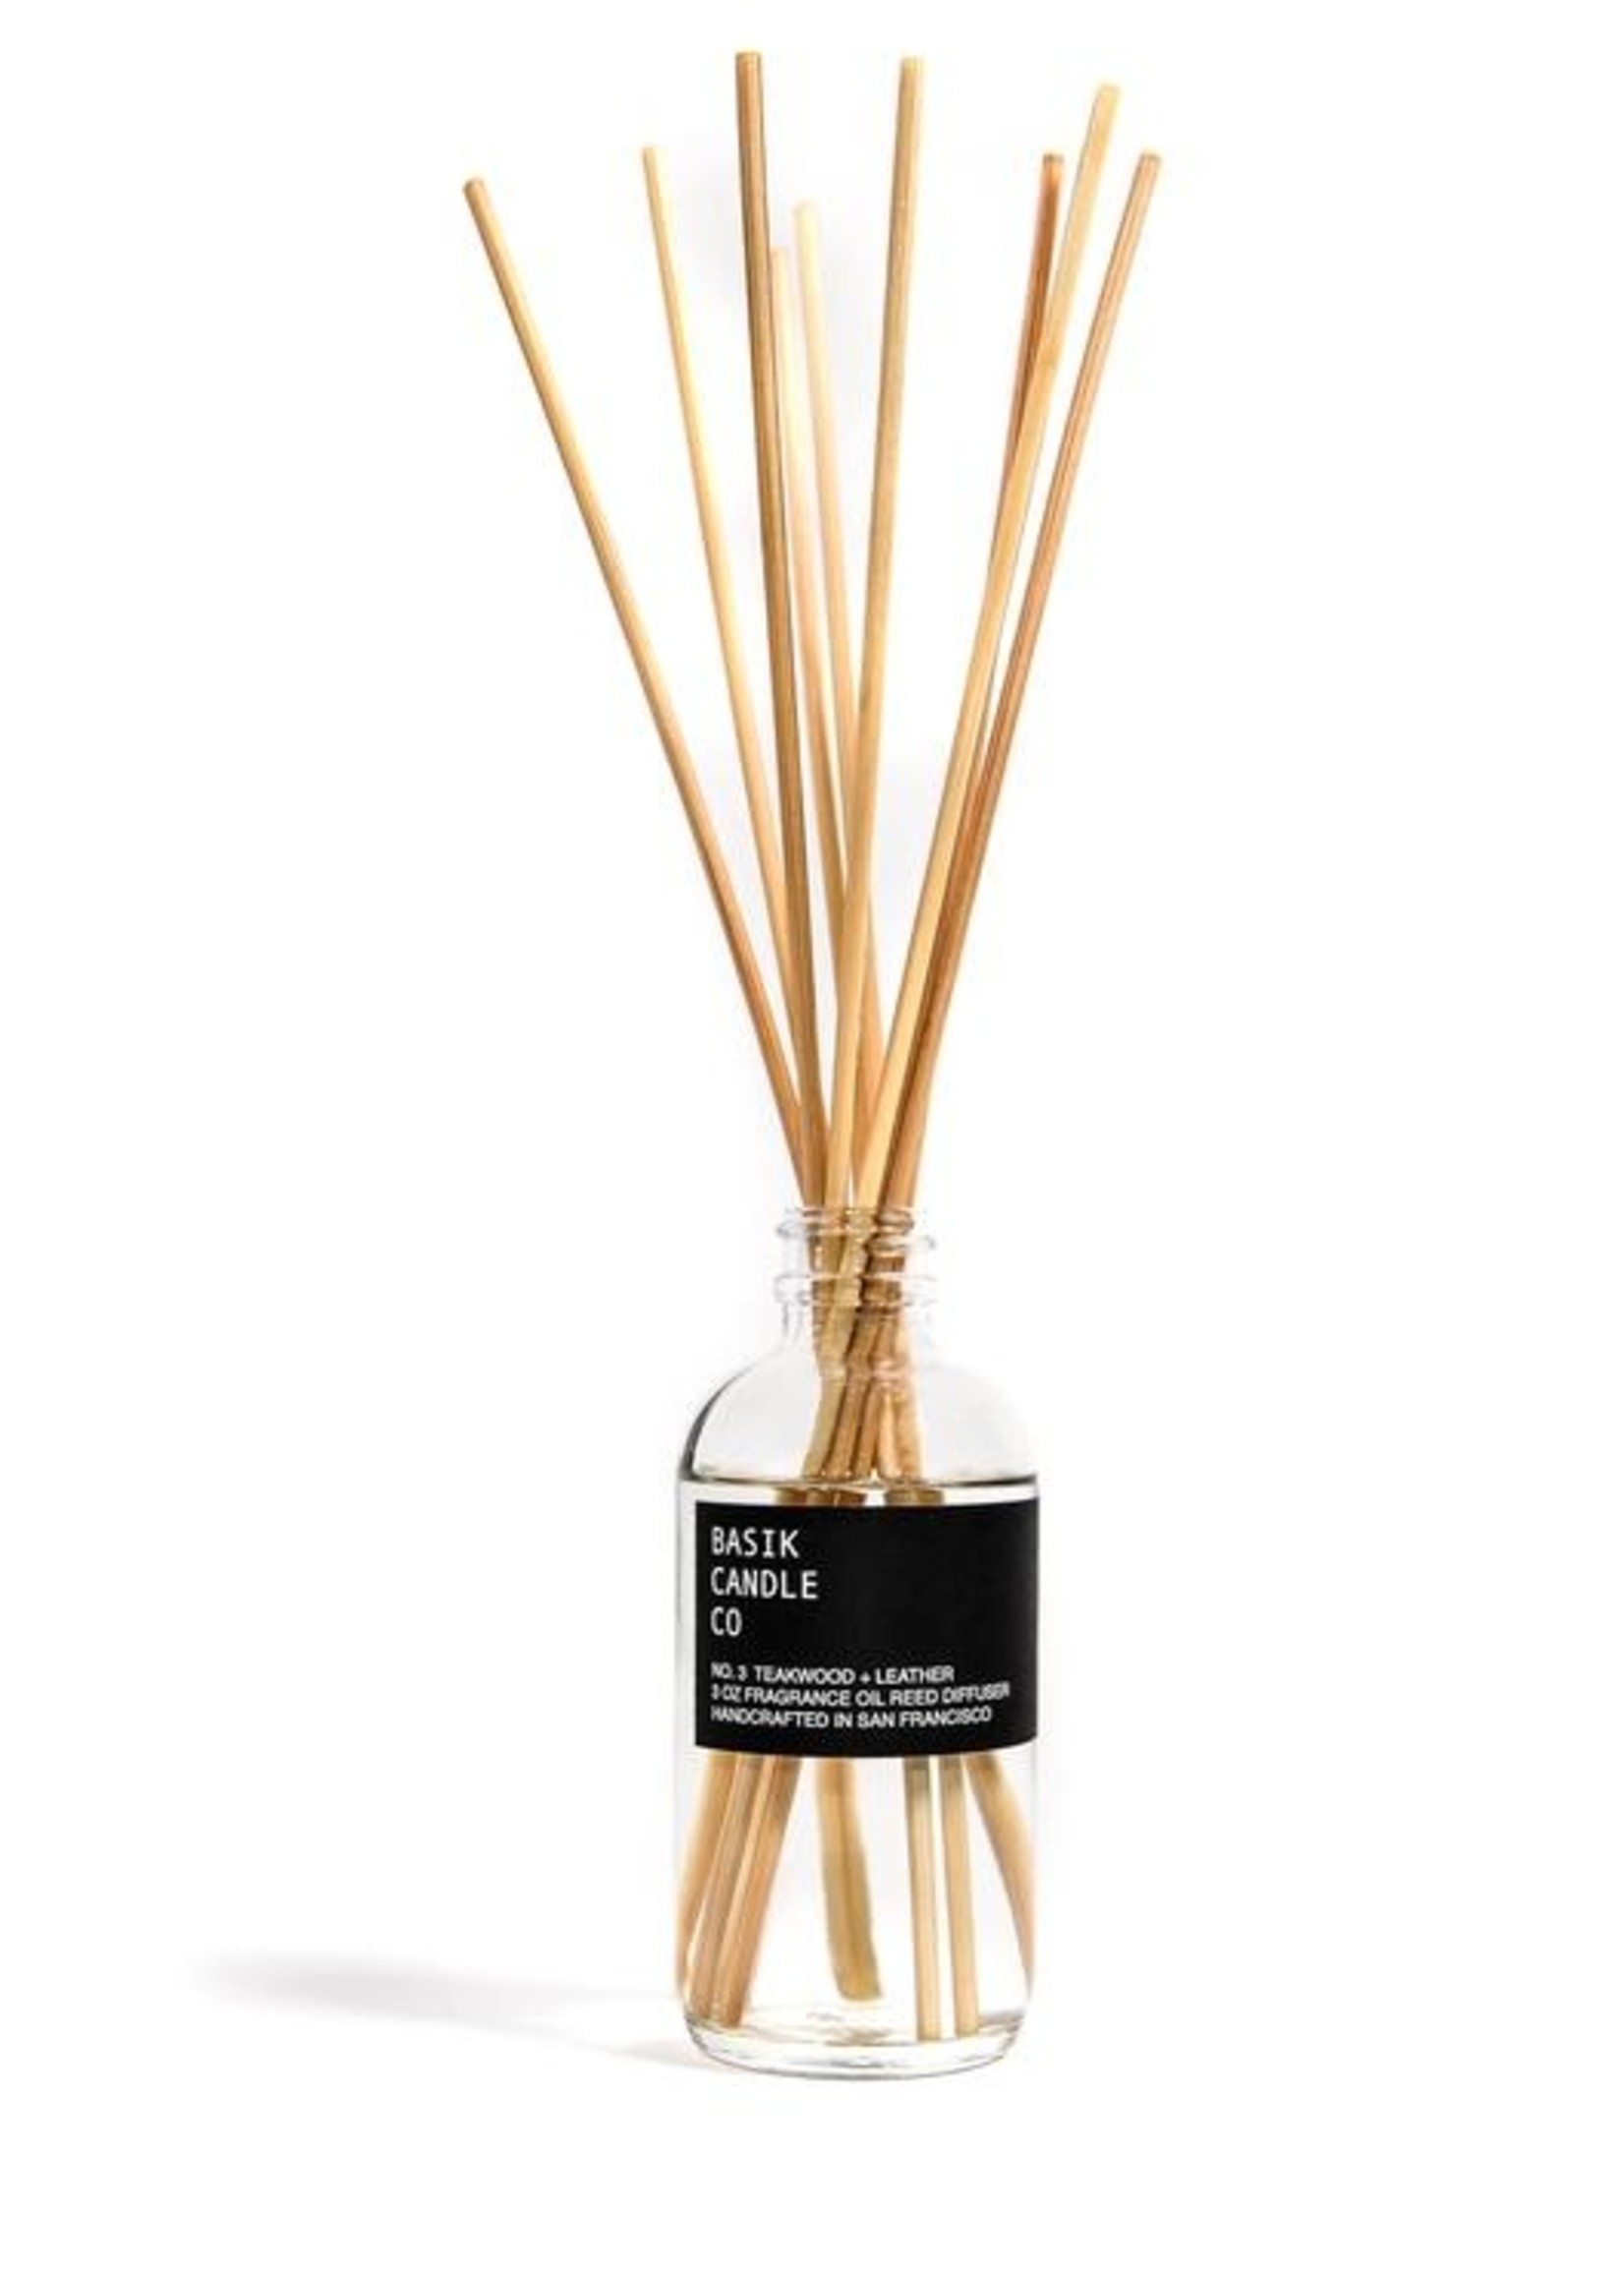 Basik Candle Co. No.3 Teakwood + Leather Reed Diffuser